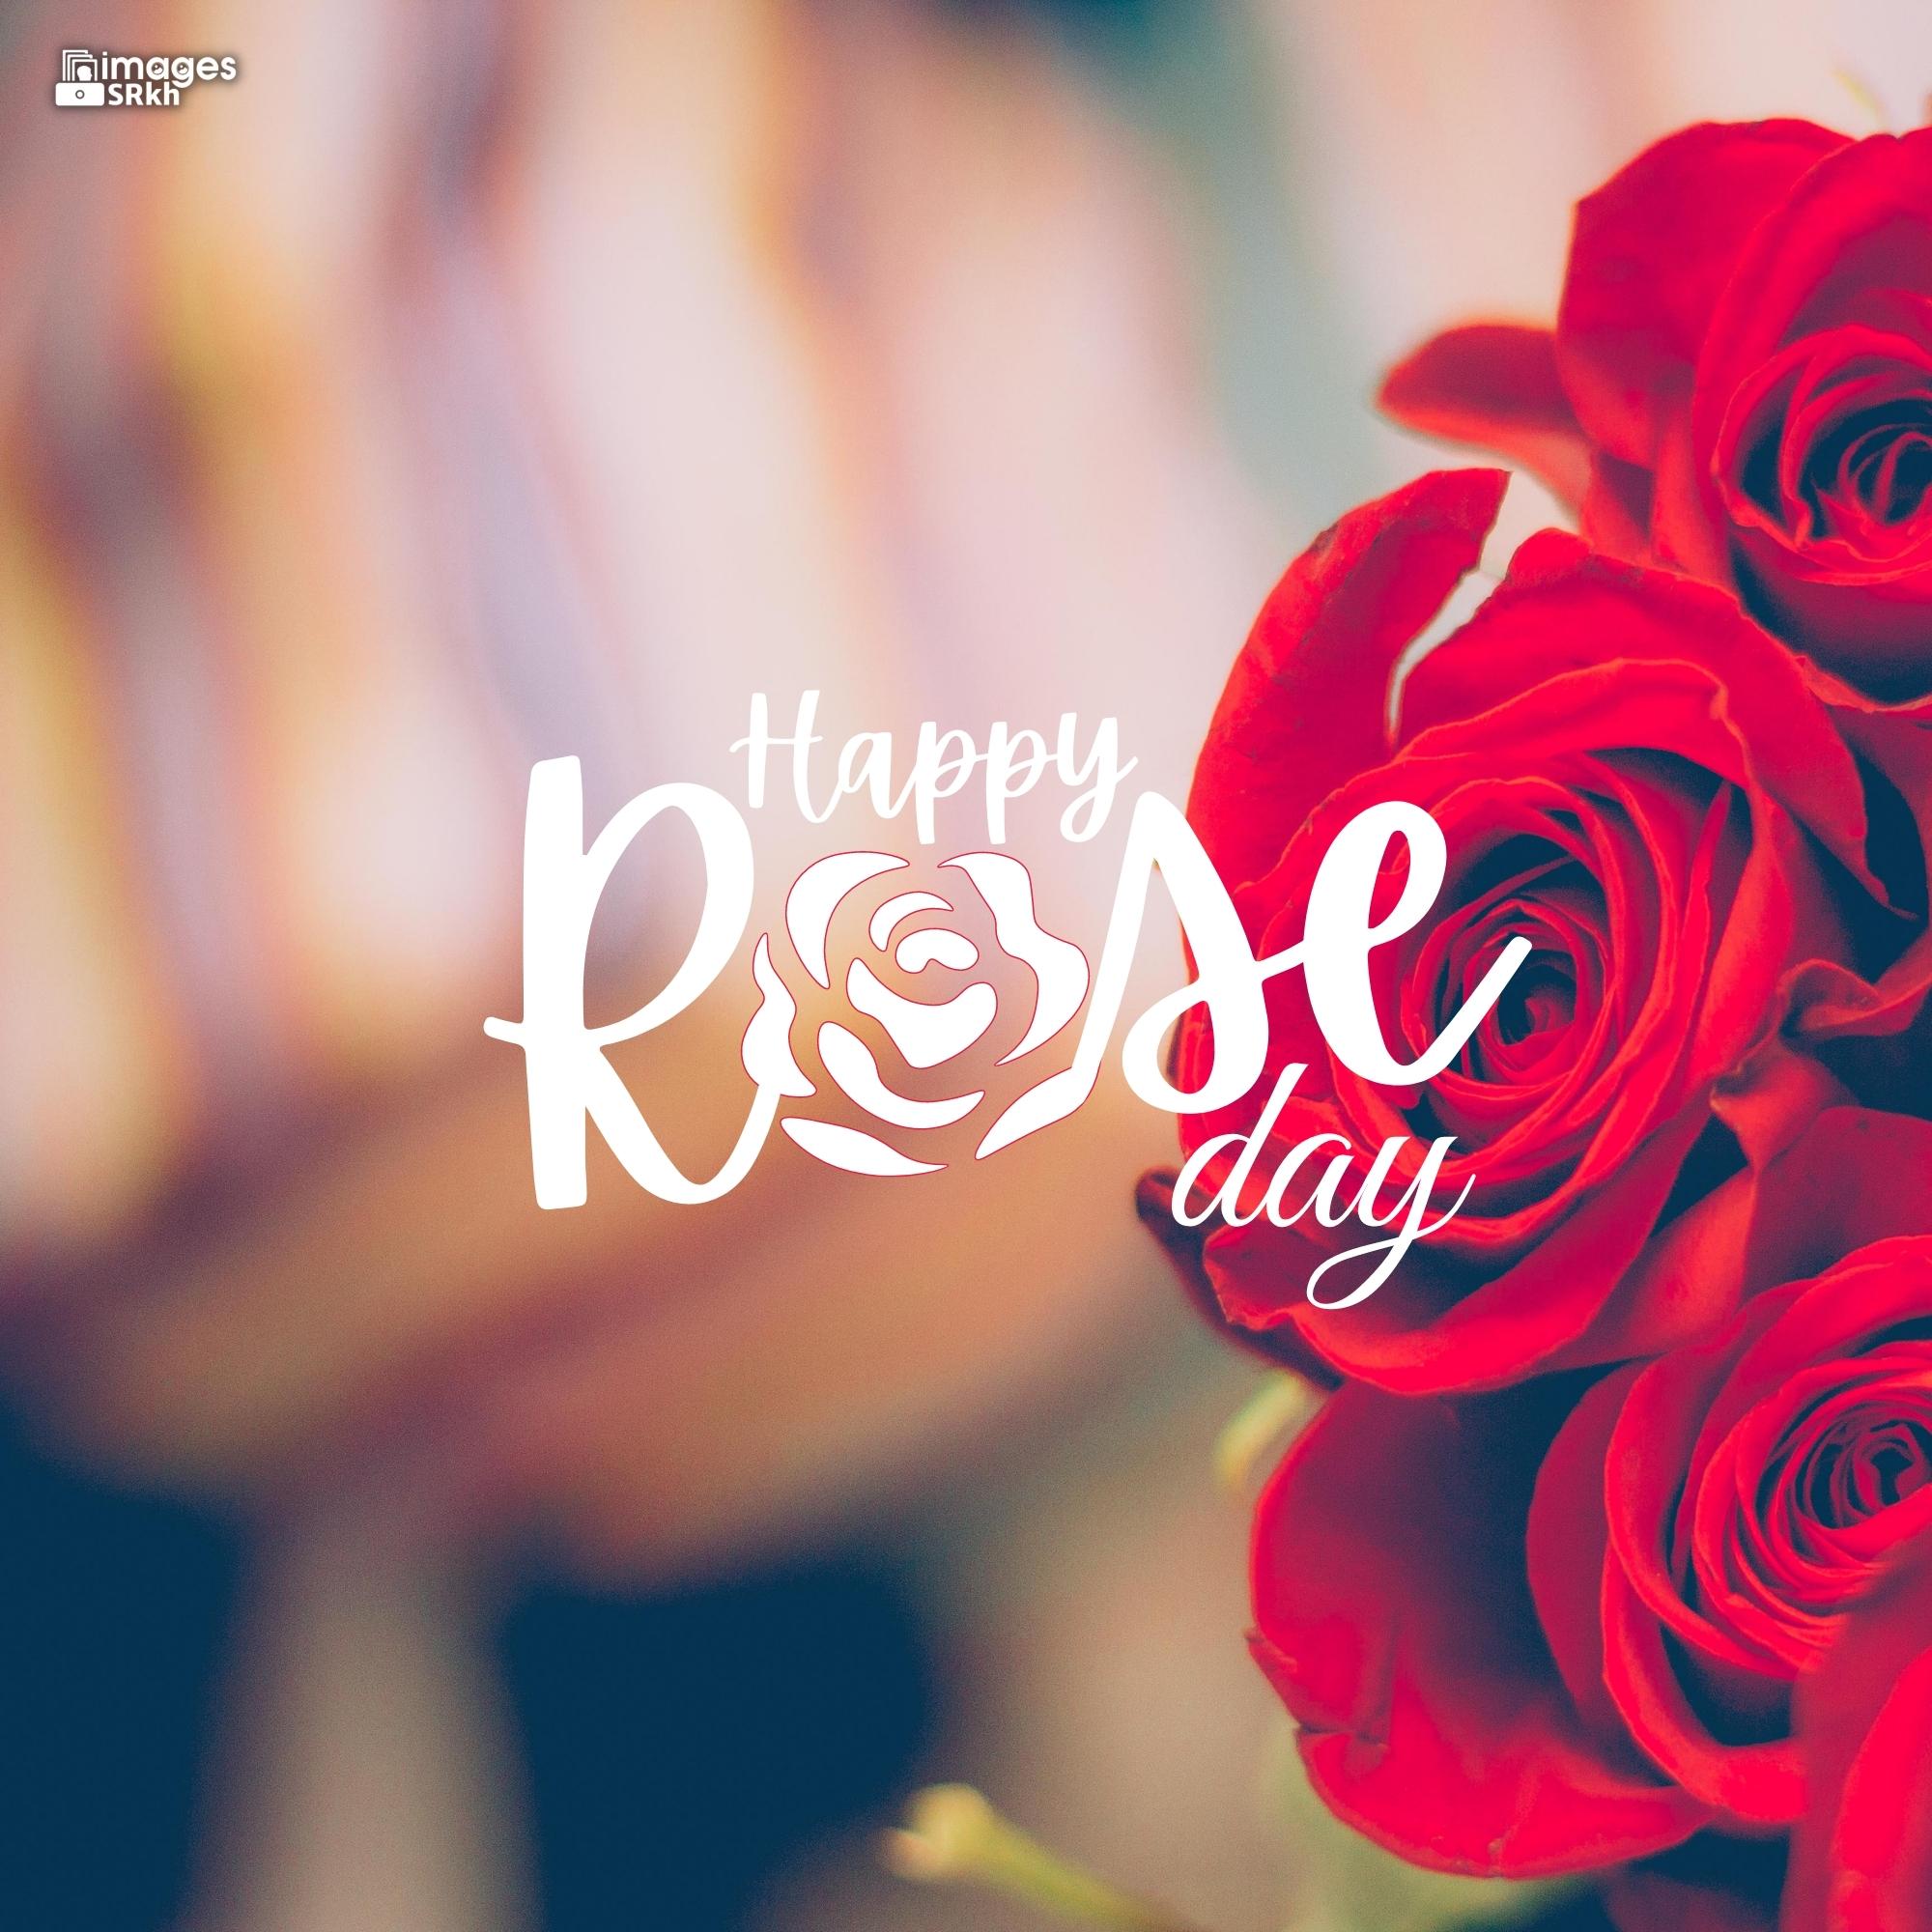 Happy Rose Day Image Hd Download (25)